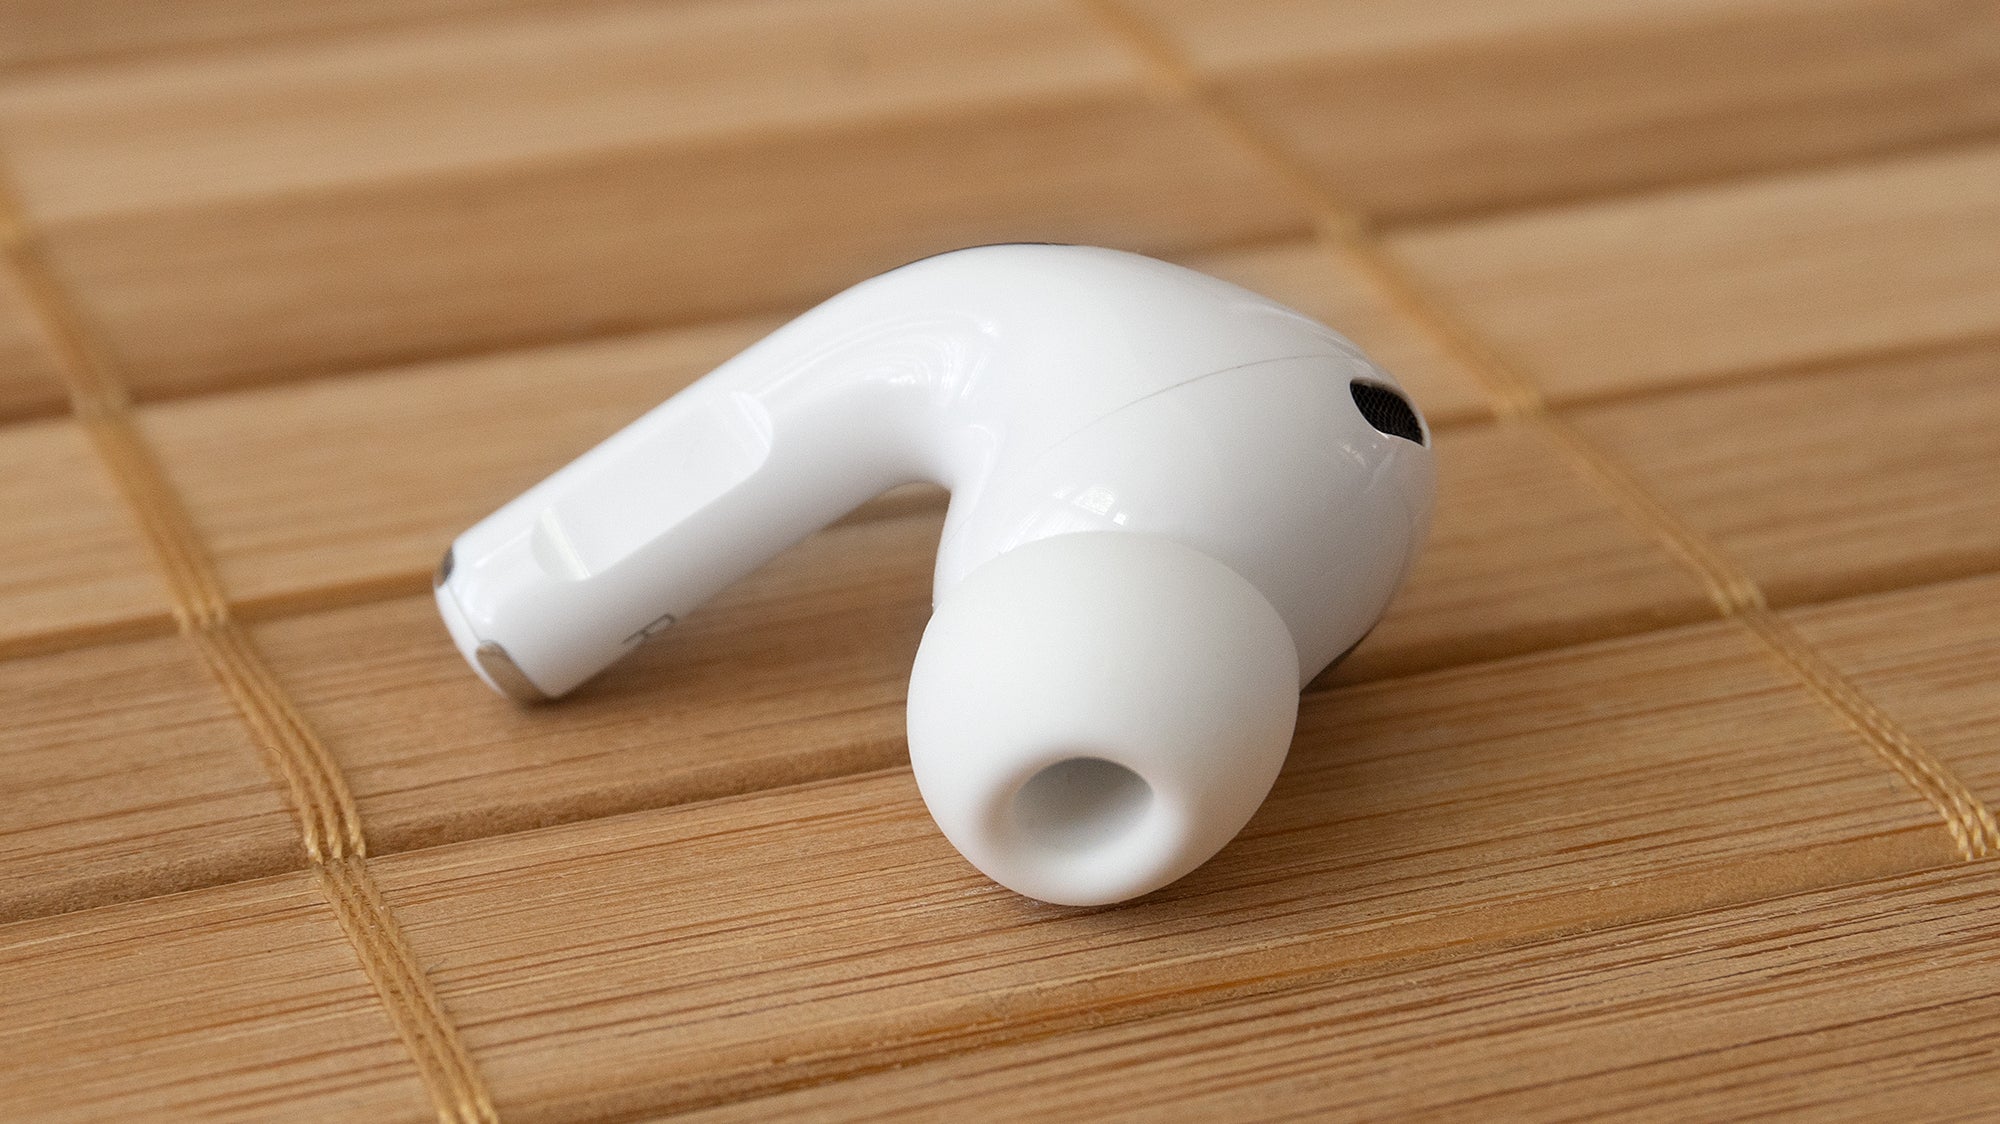 Apple now includes four sets of silicone tips in different sizes with the AirPods Pro 2nd Gen. (Photo: Andrew Liszewski | Gizmodo)